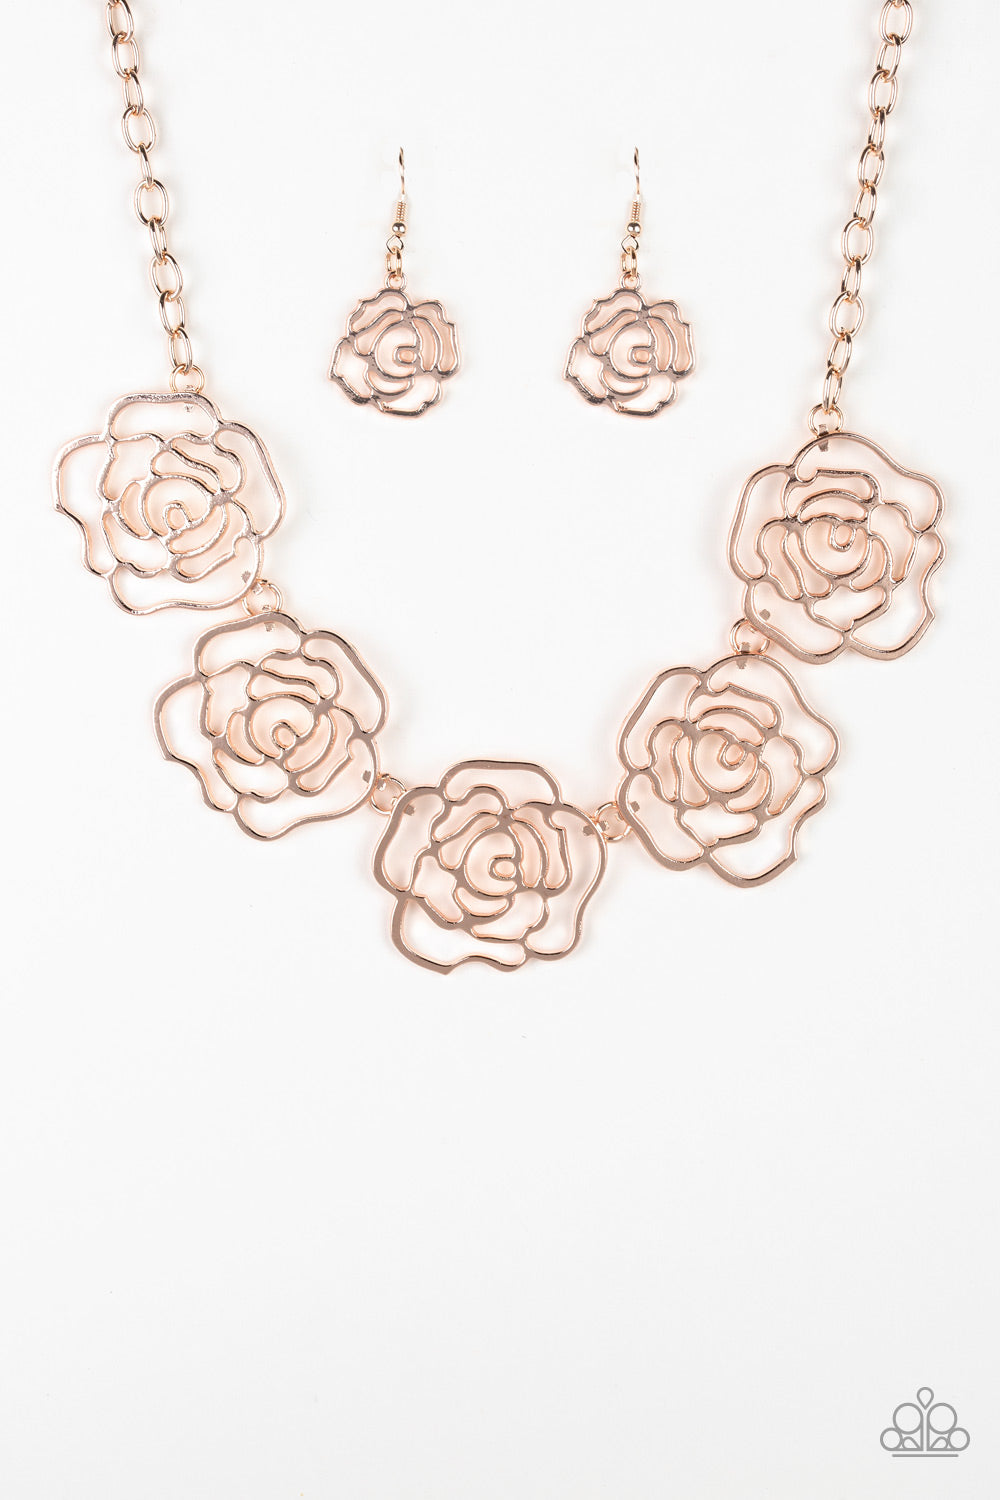 budding-beauty-rose-gold-p2wh-gdrs-129xx